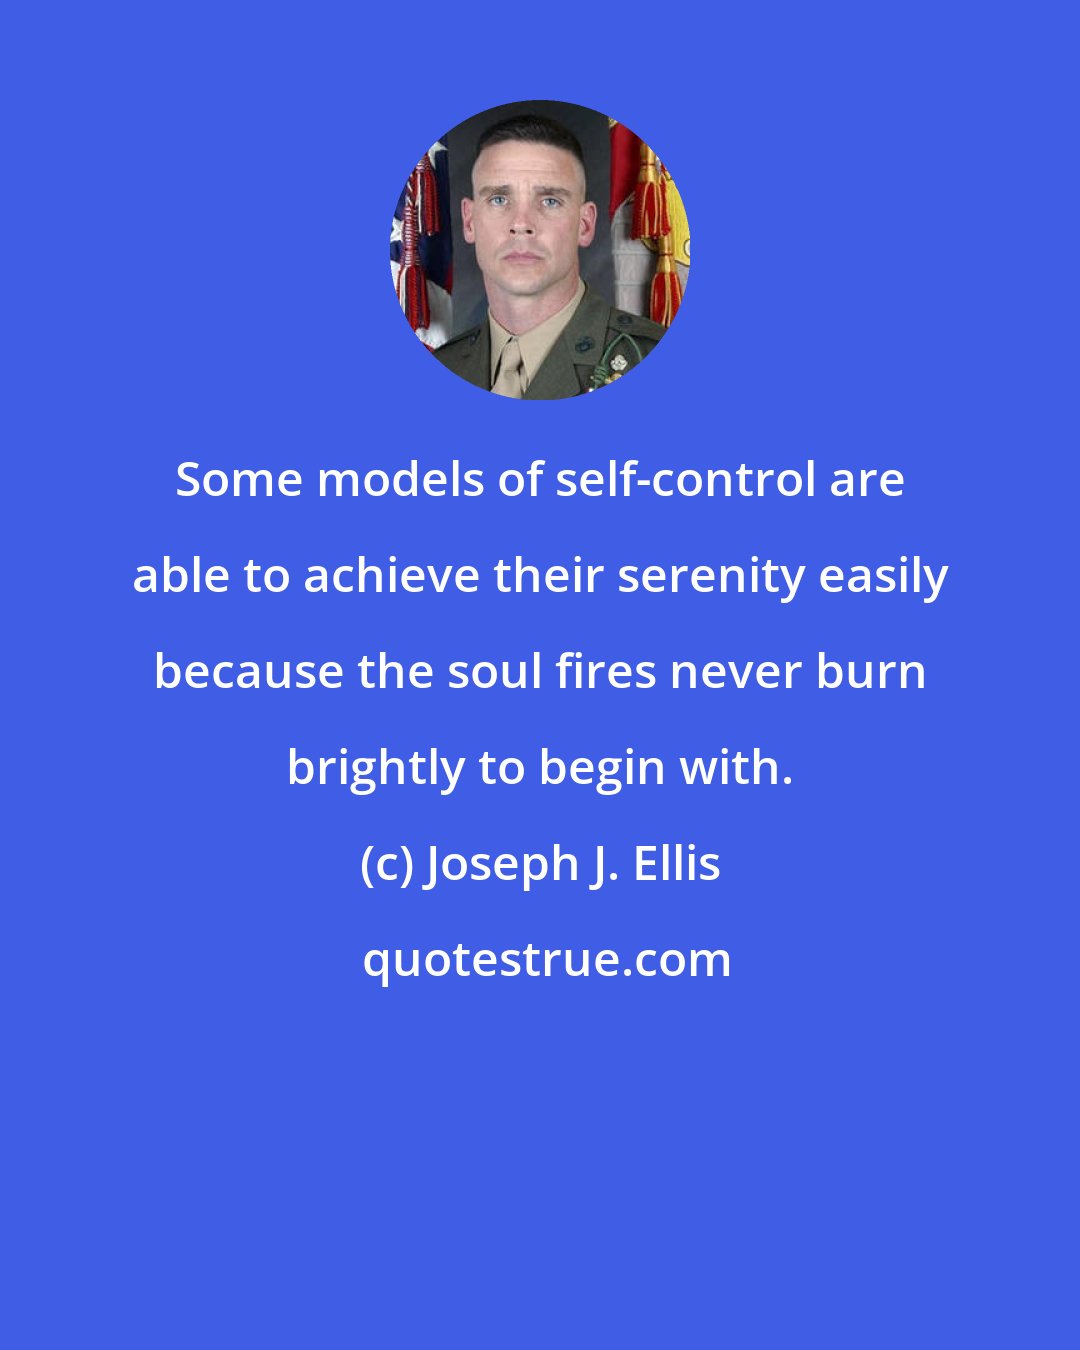 Joseph J. Ellis: Some models of self-control are able to achieve their serenity easily because the soul fires never burn brightly to begin with.